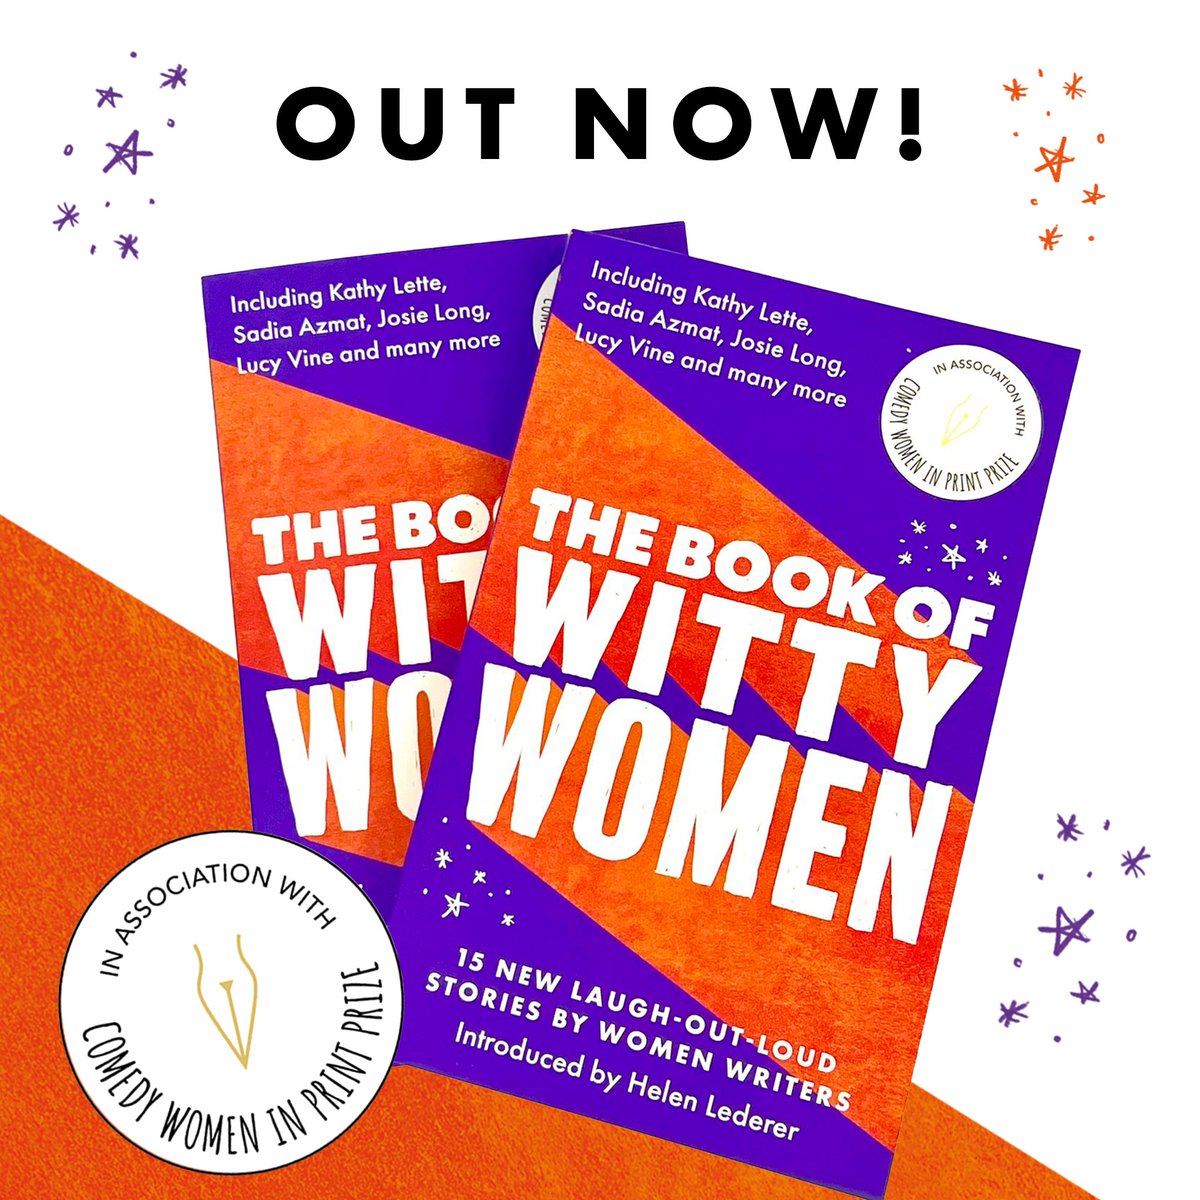 💜HAPPY PUBLICATION DAY🧡 Huge congratulations to all the contributors of this fantastic anthology! It is amazing that we have been able to champion Comedy Women in Print 🦾📚 So if you fancy a good laugh, give these short stories a go🤣🫶